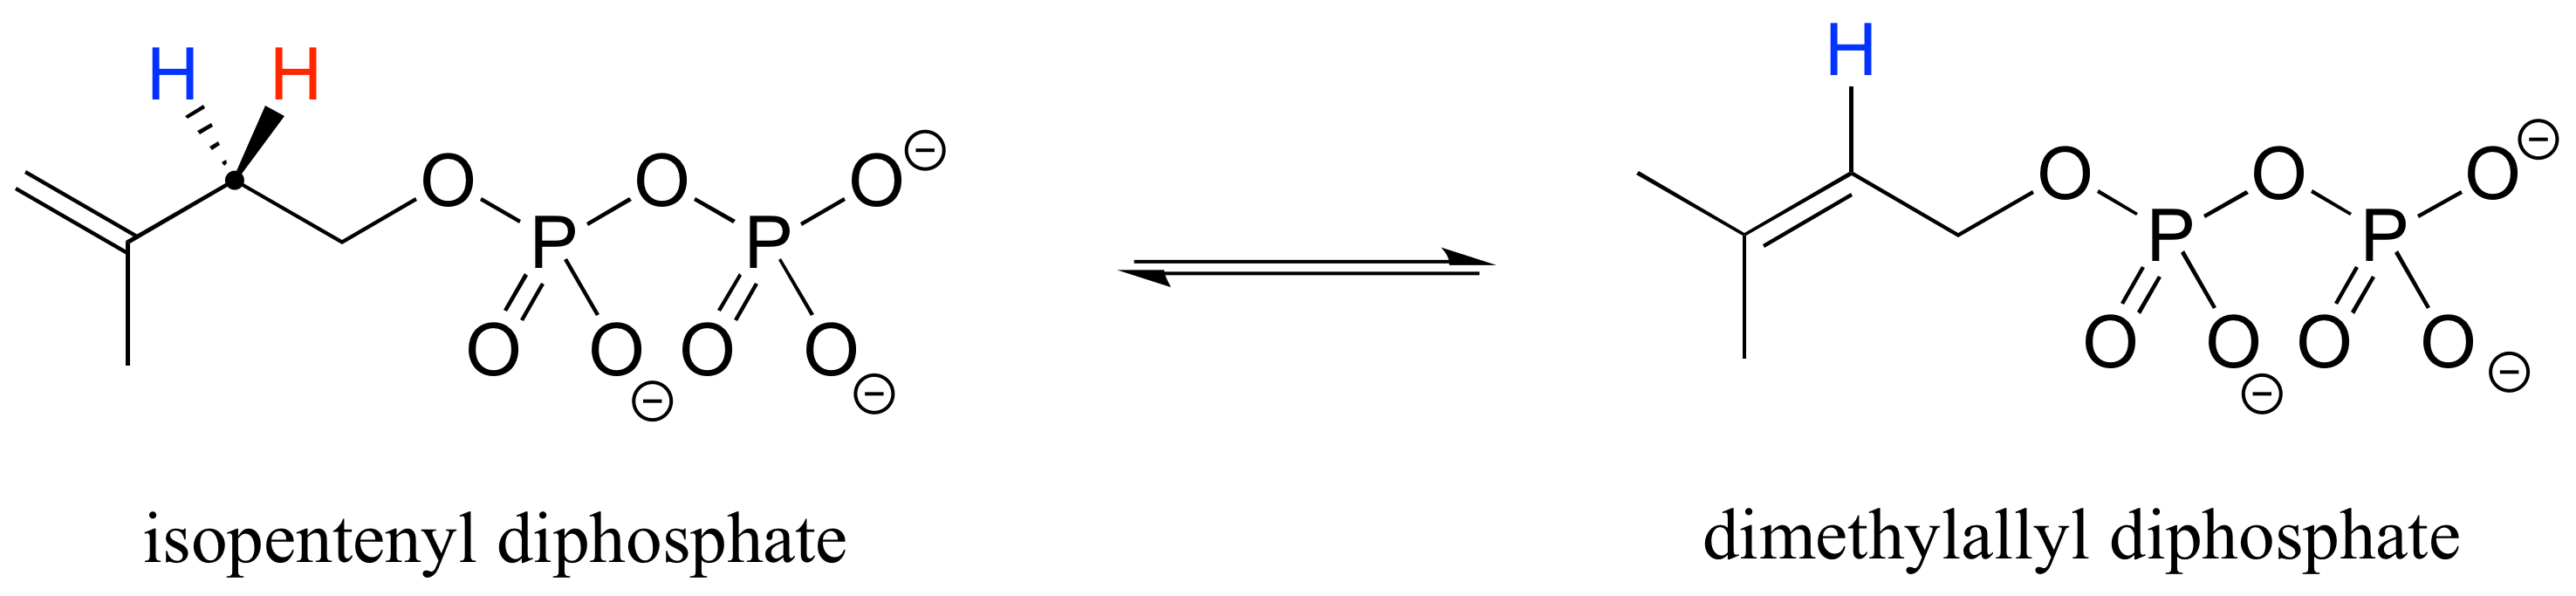 Isopentenyl diphosphate in equilibrium with dimethylallyl diphosphate. One hydrogen is removed and the alkene moves from carbons 1 and 2 to carbons 2 and 3. 